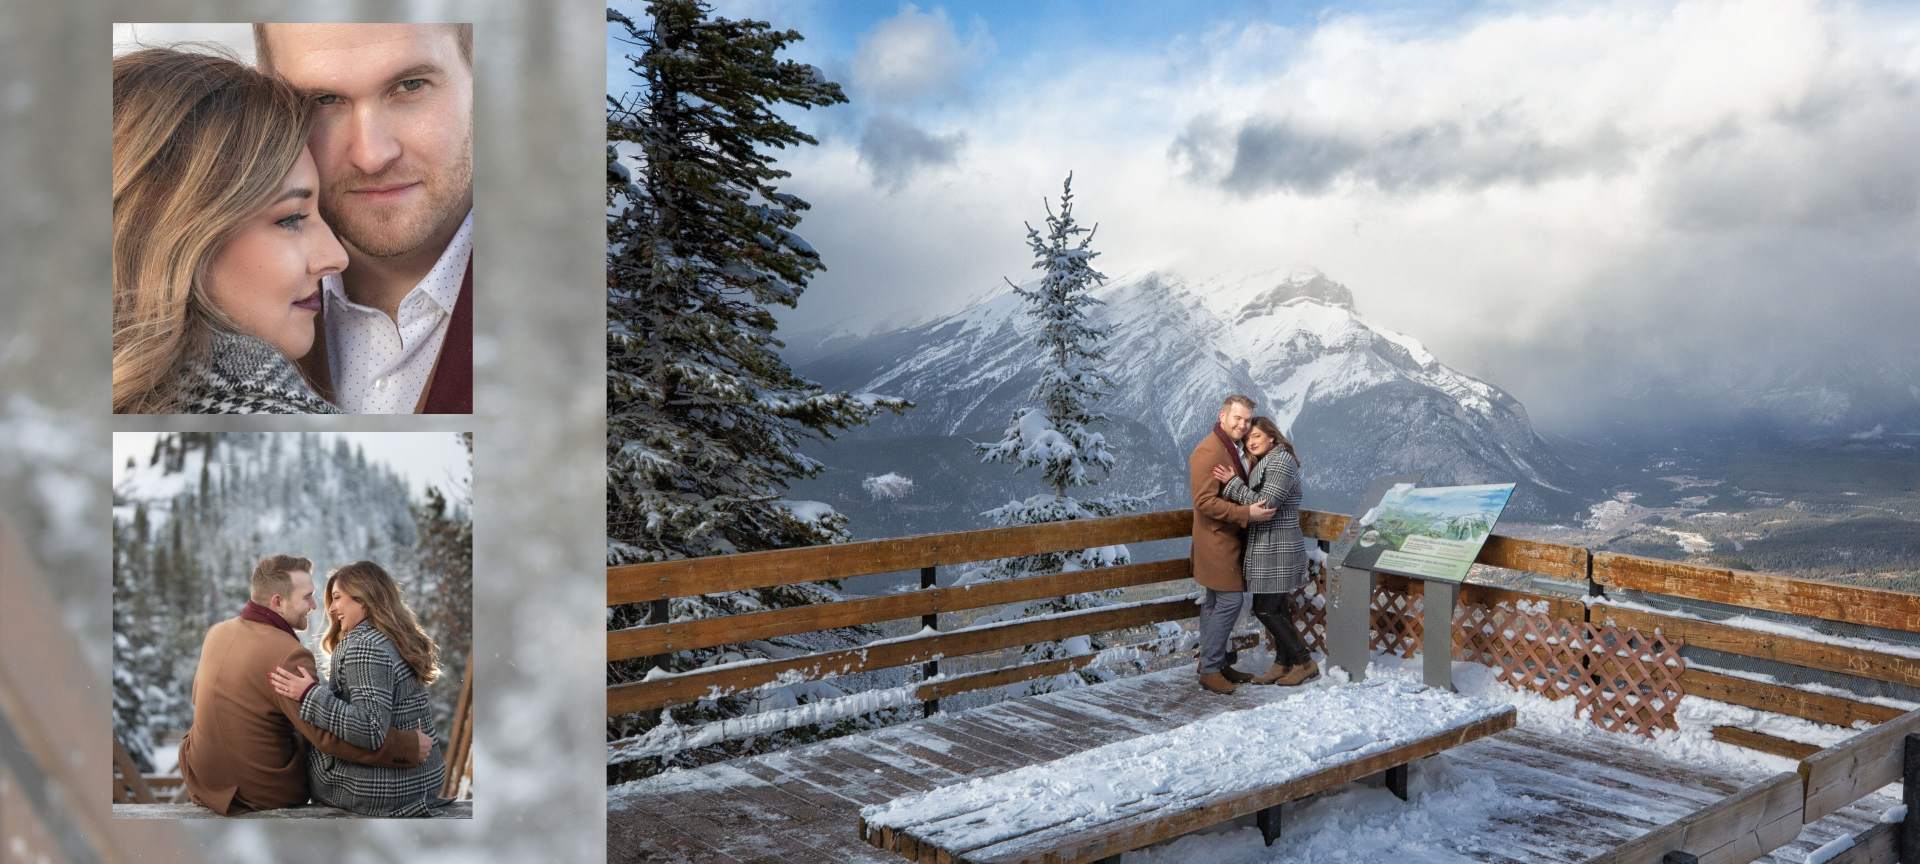 banff proposal package - recently engaged couple during their mountain proposal at banff national park